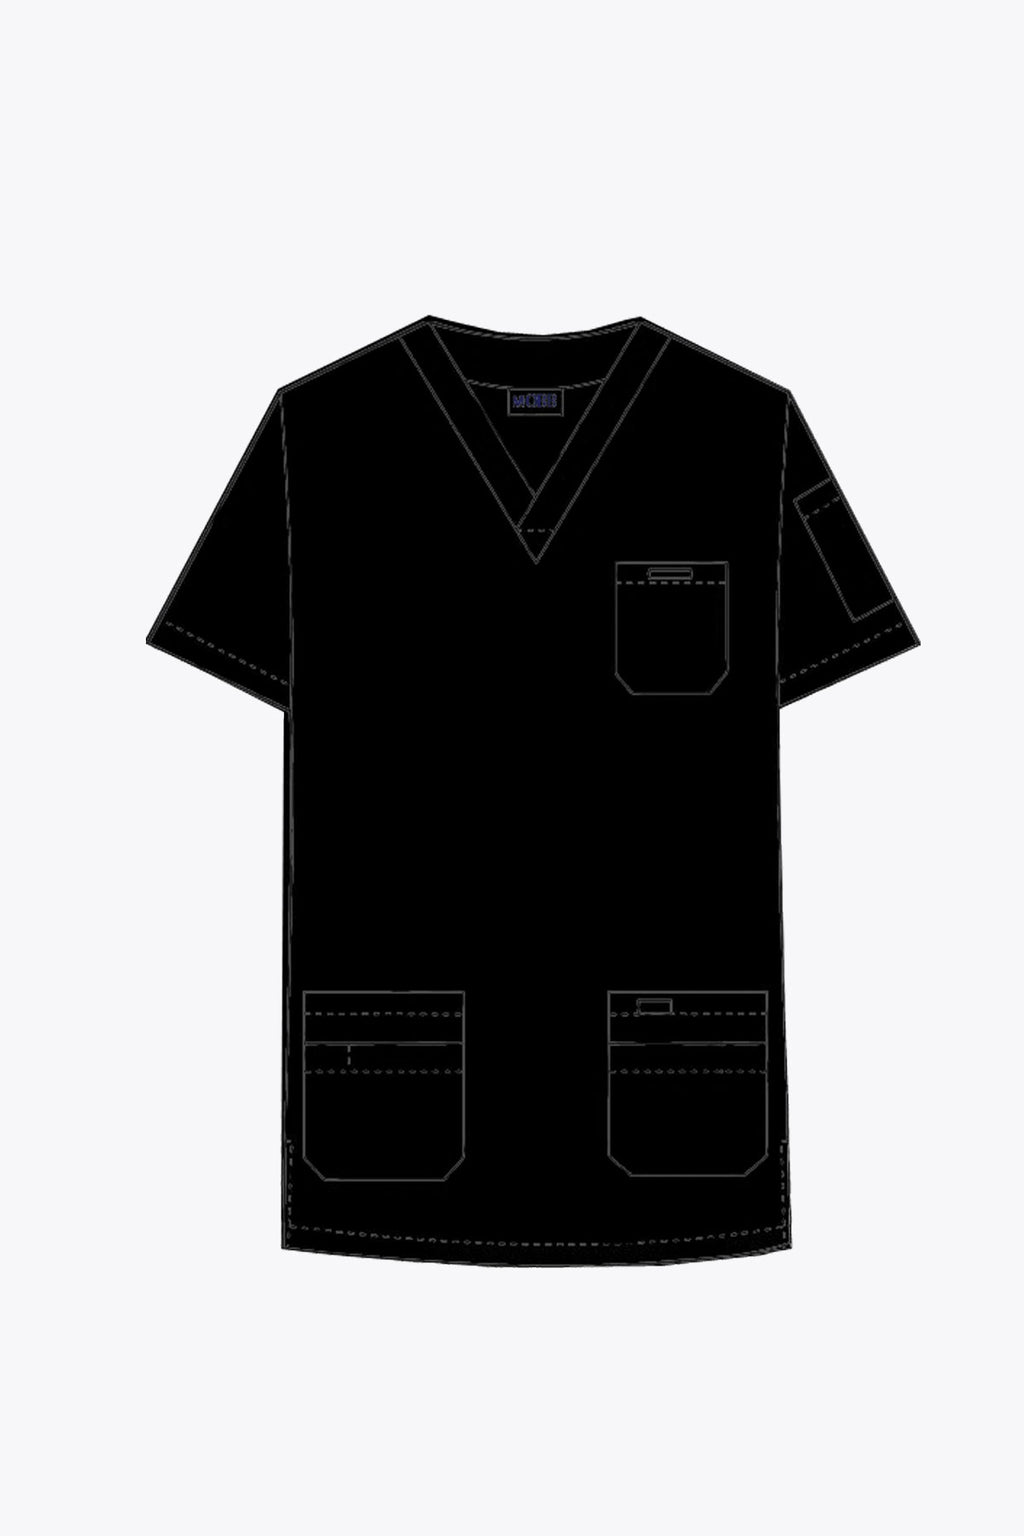 Product - V-Neck Solid MOBB Scrub Top